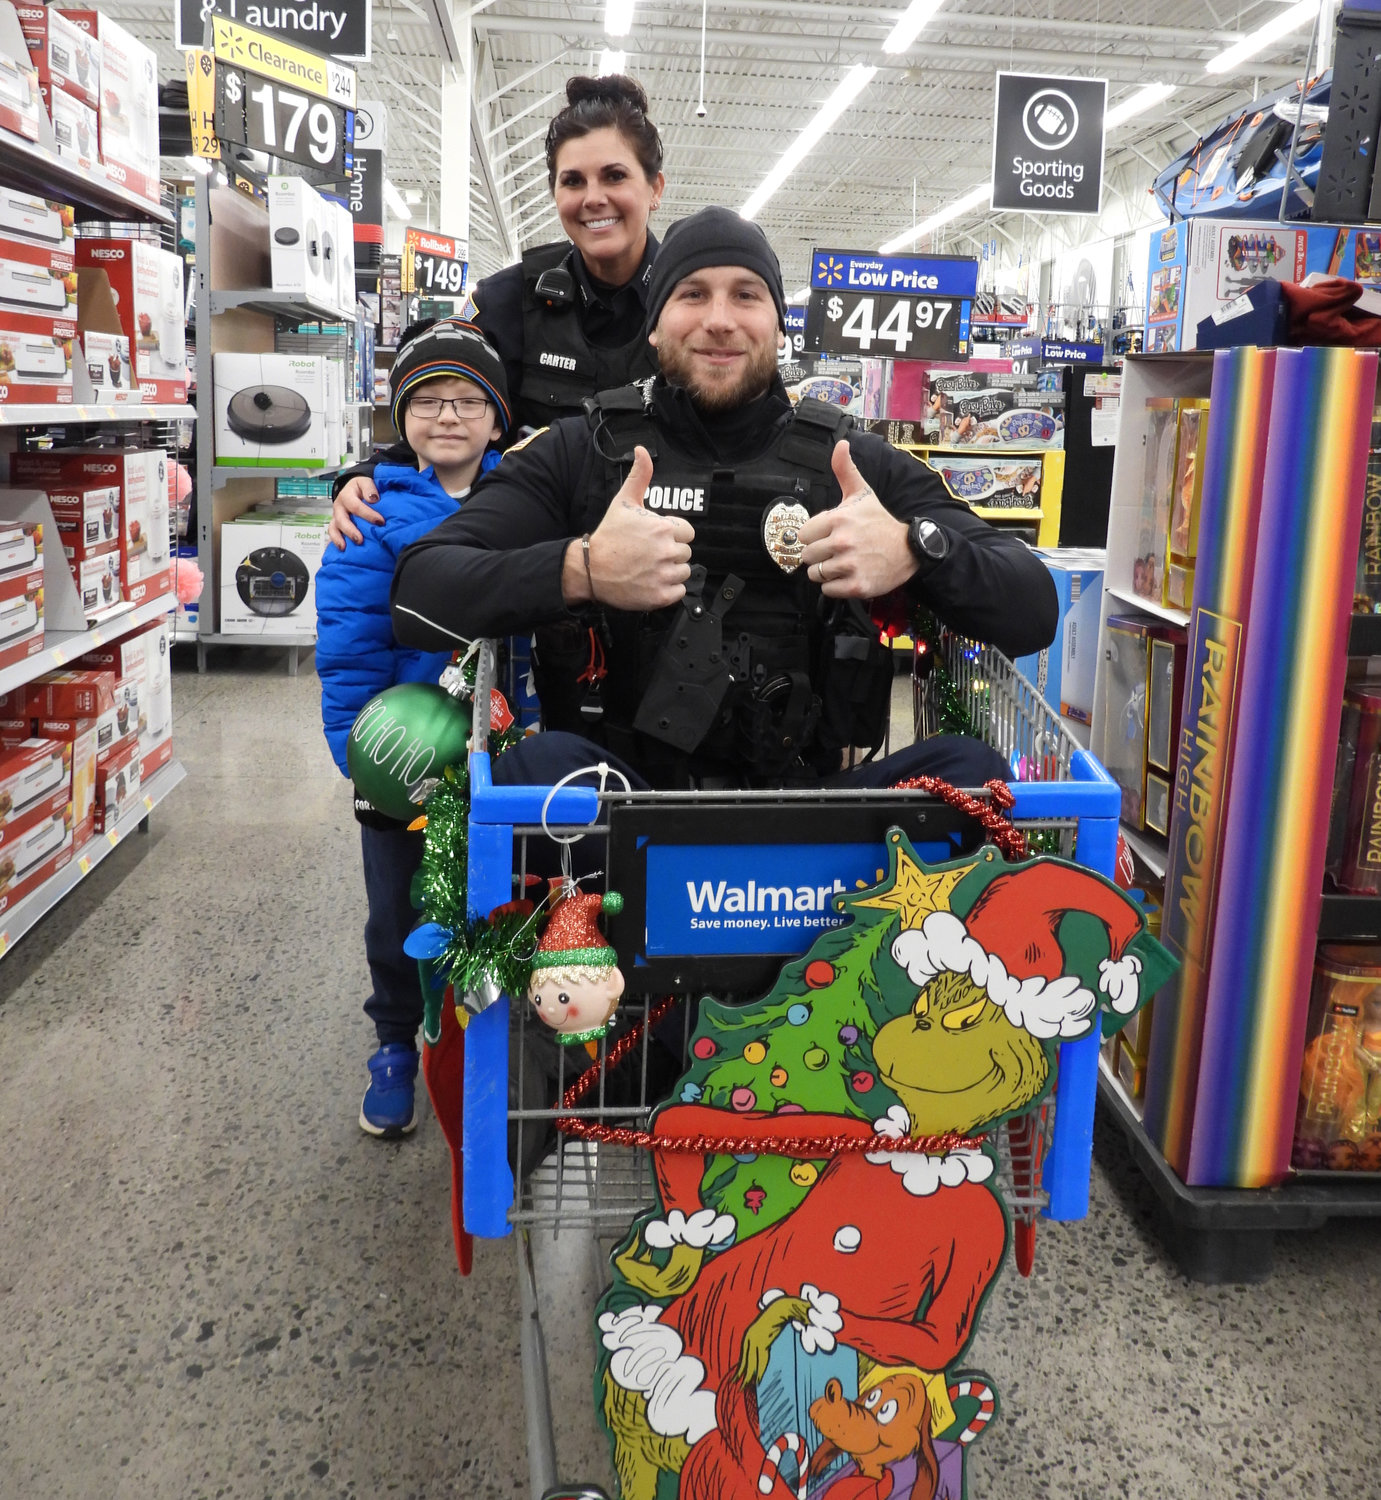 More than 80 children got a chance to shop with a cop at the Oneida Police Department's annual Shop with a Cop, where they got to meet and talk with local police officers while shopping for everything on their Christmas list. Pictured is seven-year-old Urijah Cox, shopping with Officer Sarah Carter, with Officer Denny Kowalski riding in their festive shopping cart.